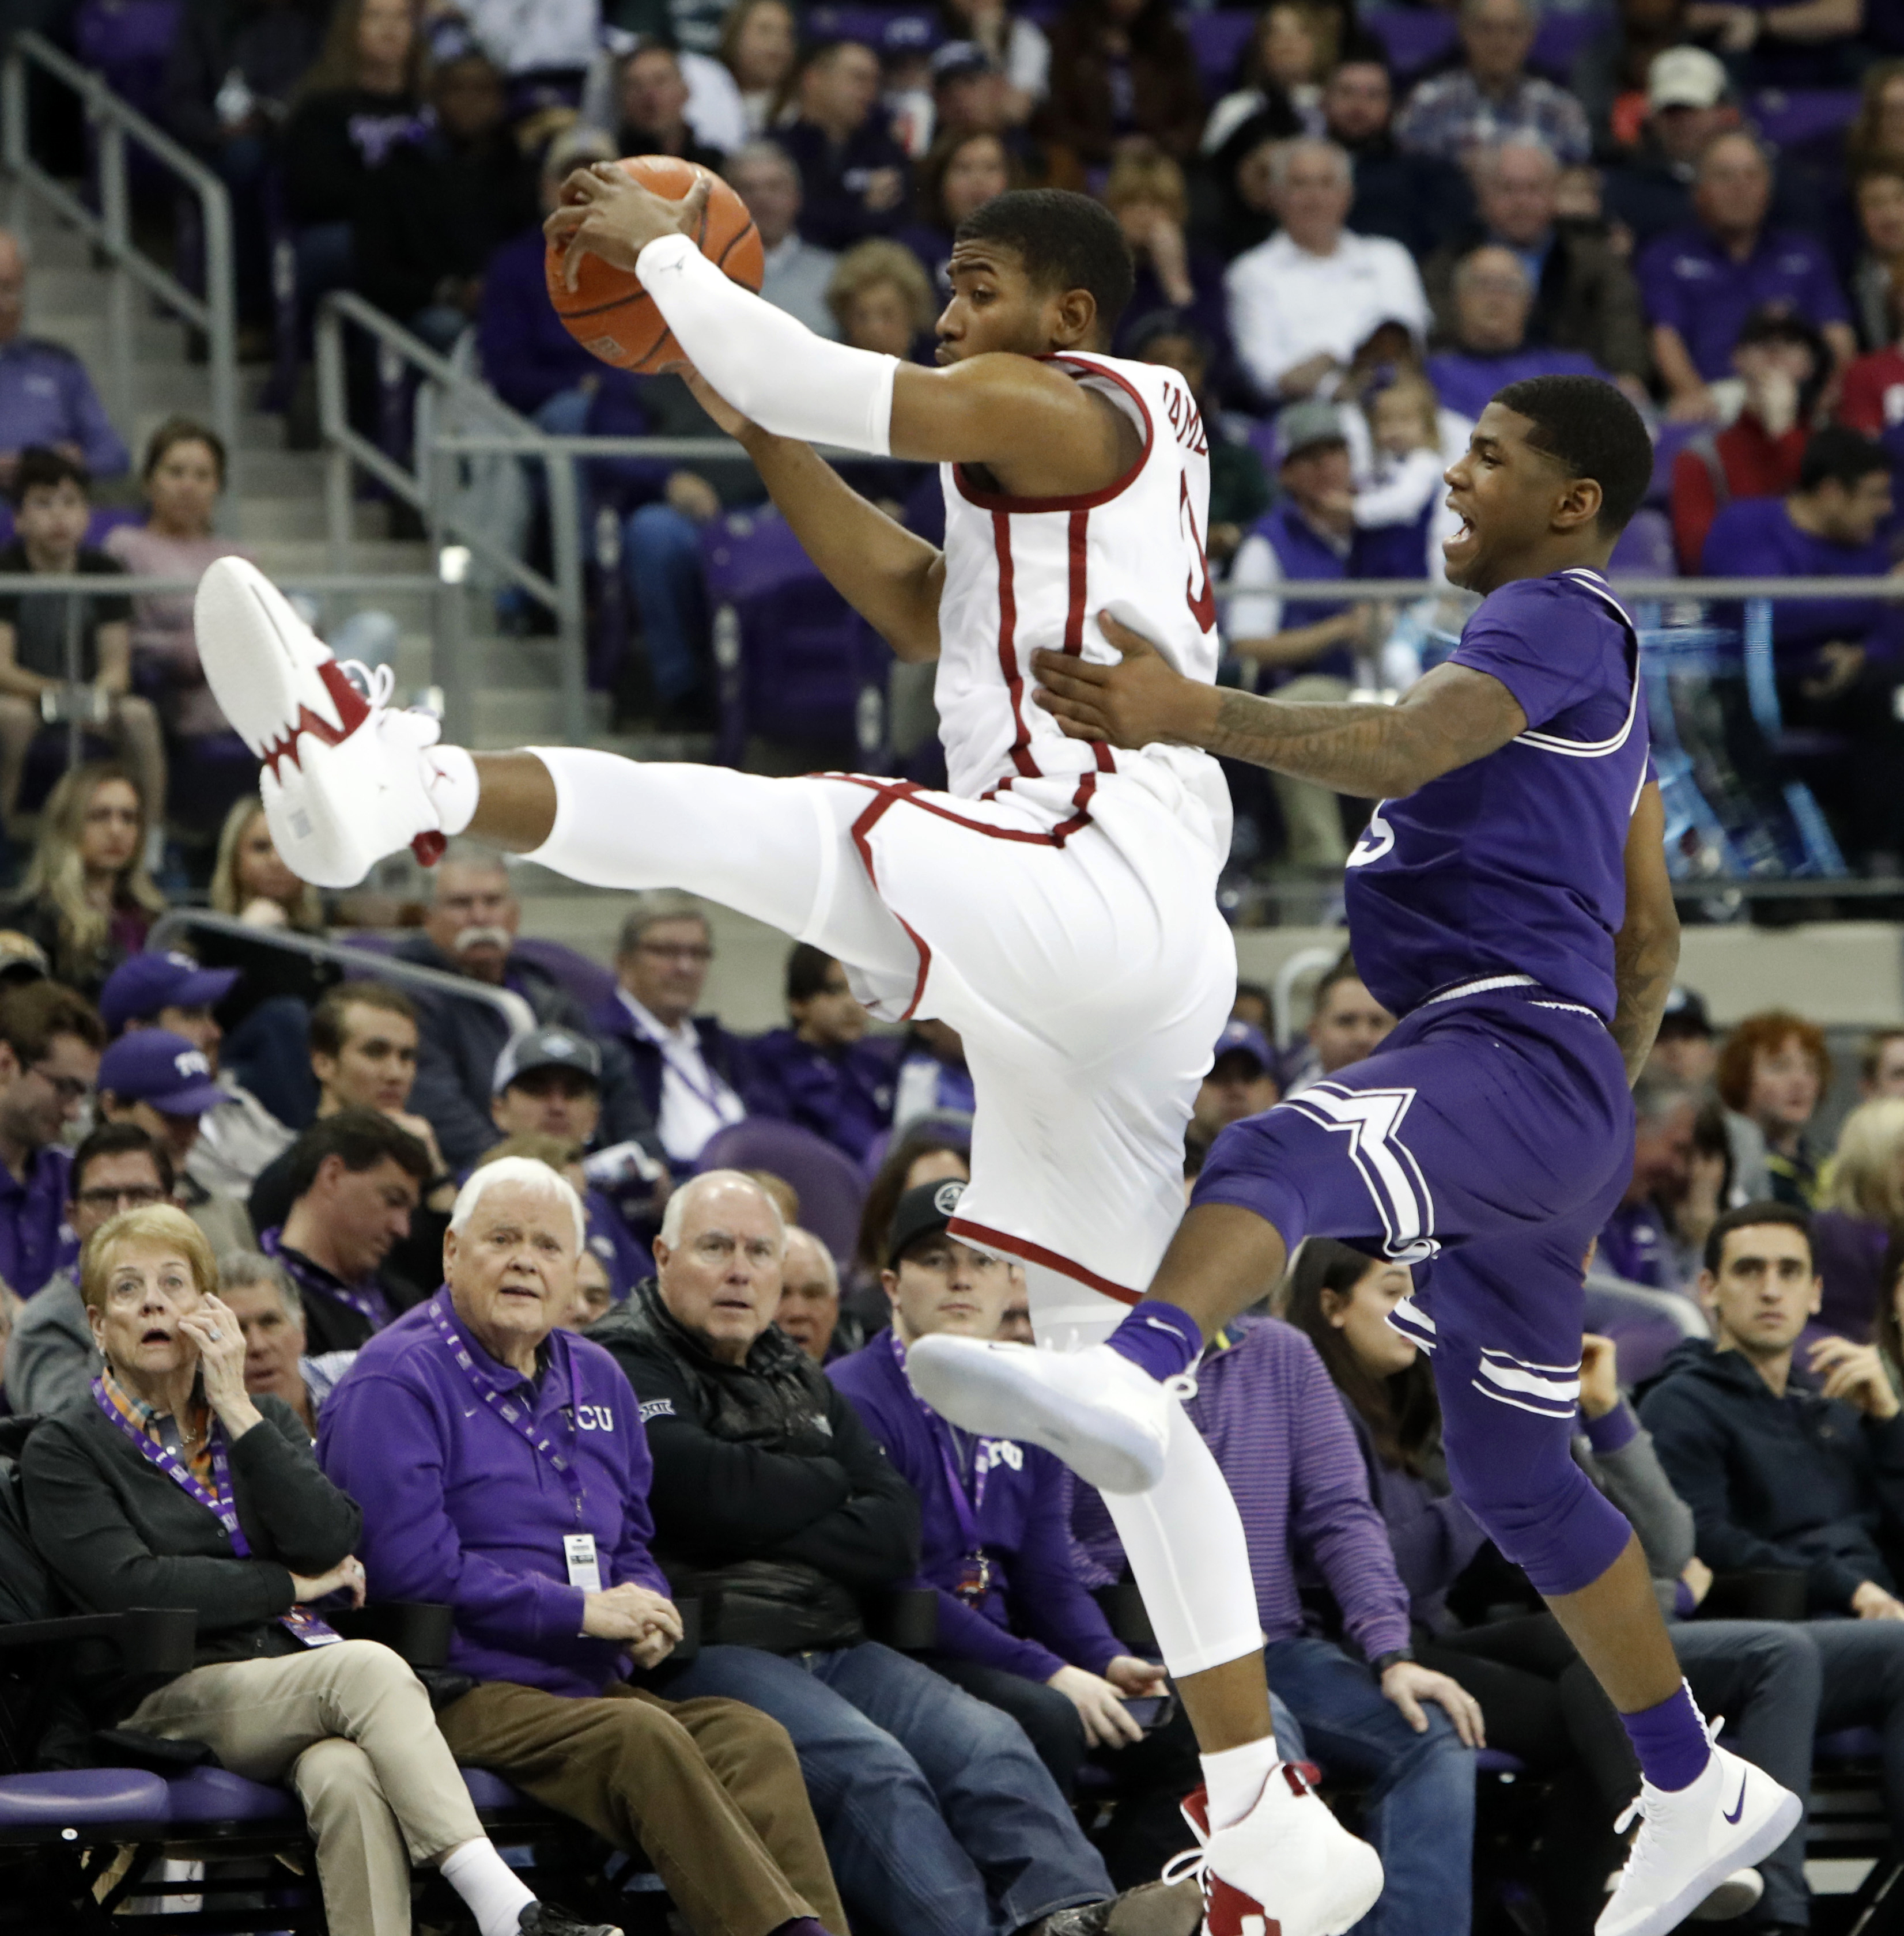 Doolittle helps OU stop 5-game skid in 71-62 win over TCU